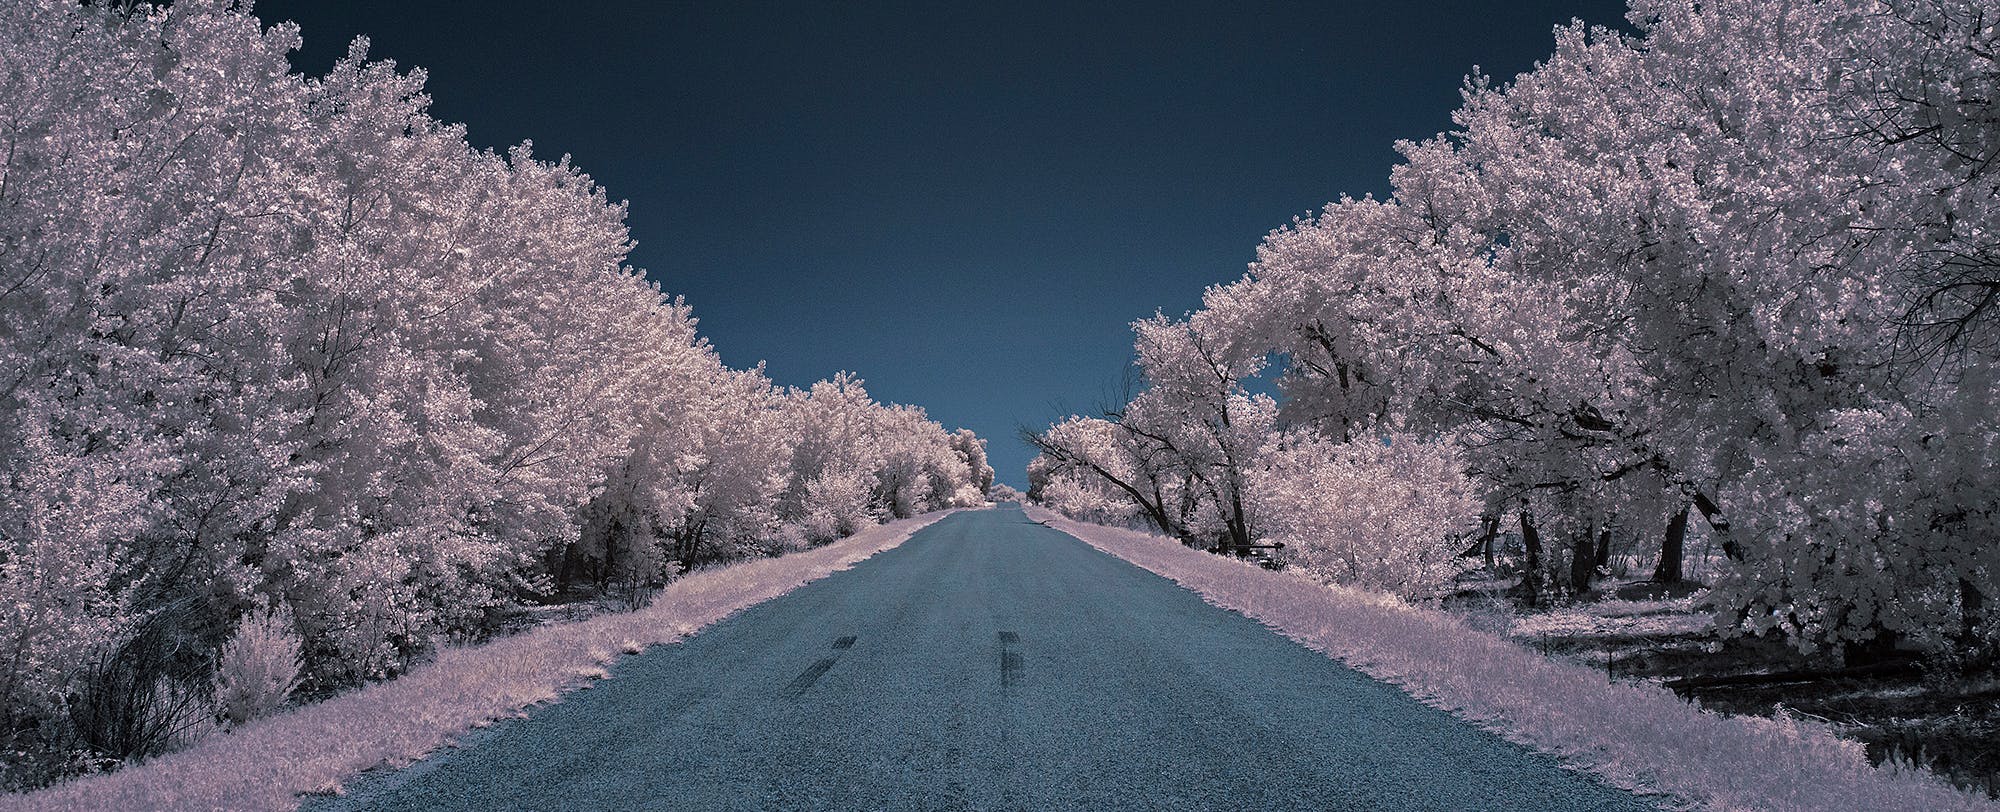 The Unseen: Infrared Photography Tips and Tricks